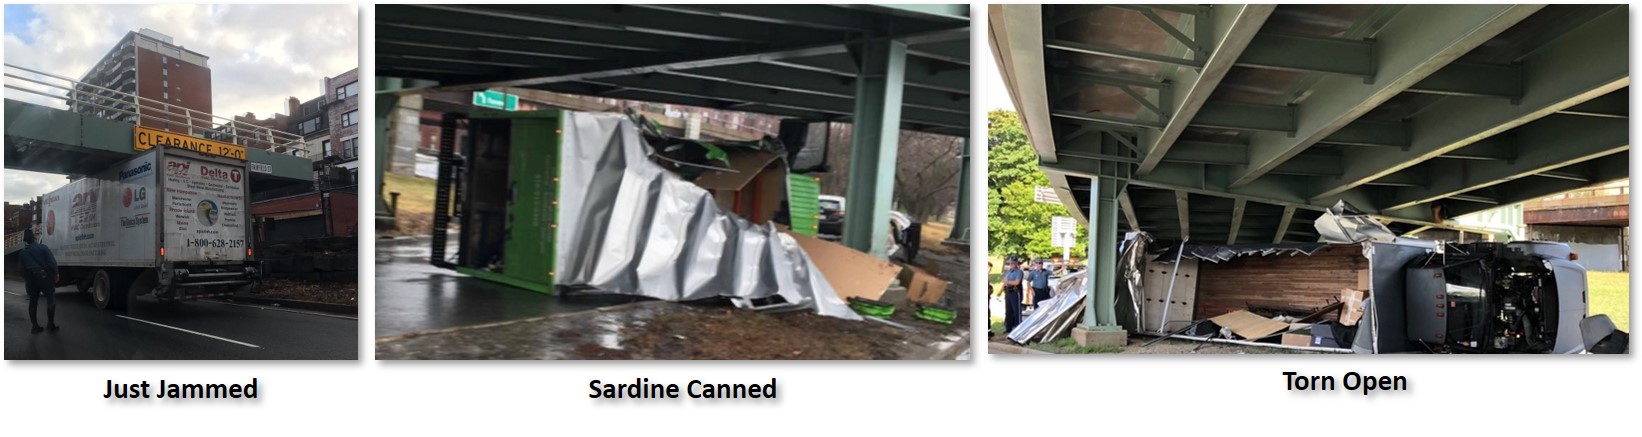 Storrow Drive, Getting Storrowed, low-clearance bridges, sardine-canned, jammed